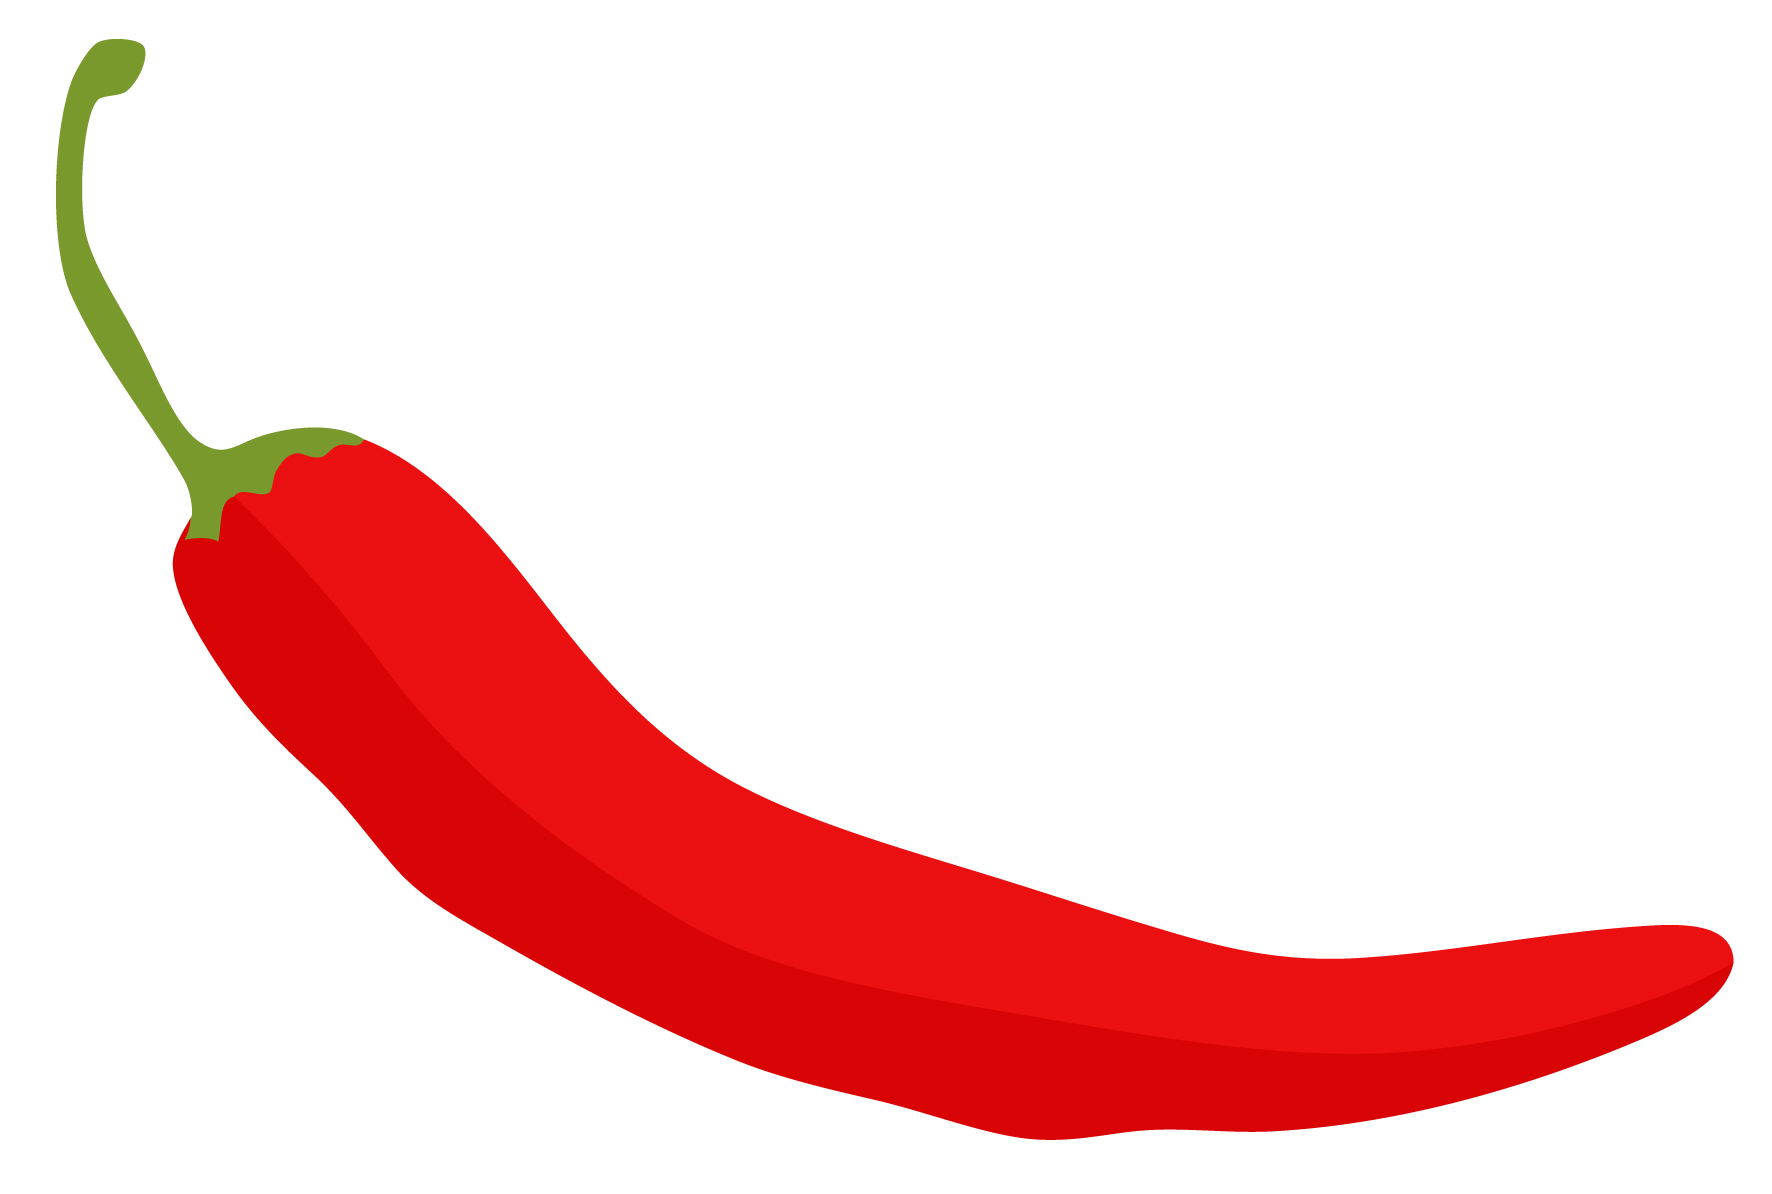 Chili Kid Image Png Clipart